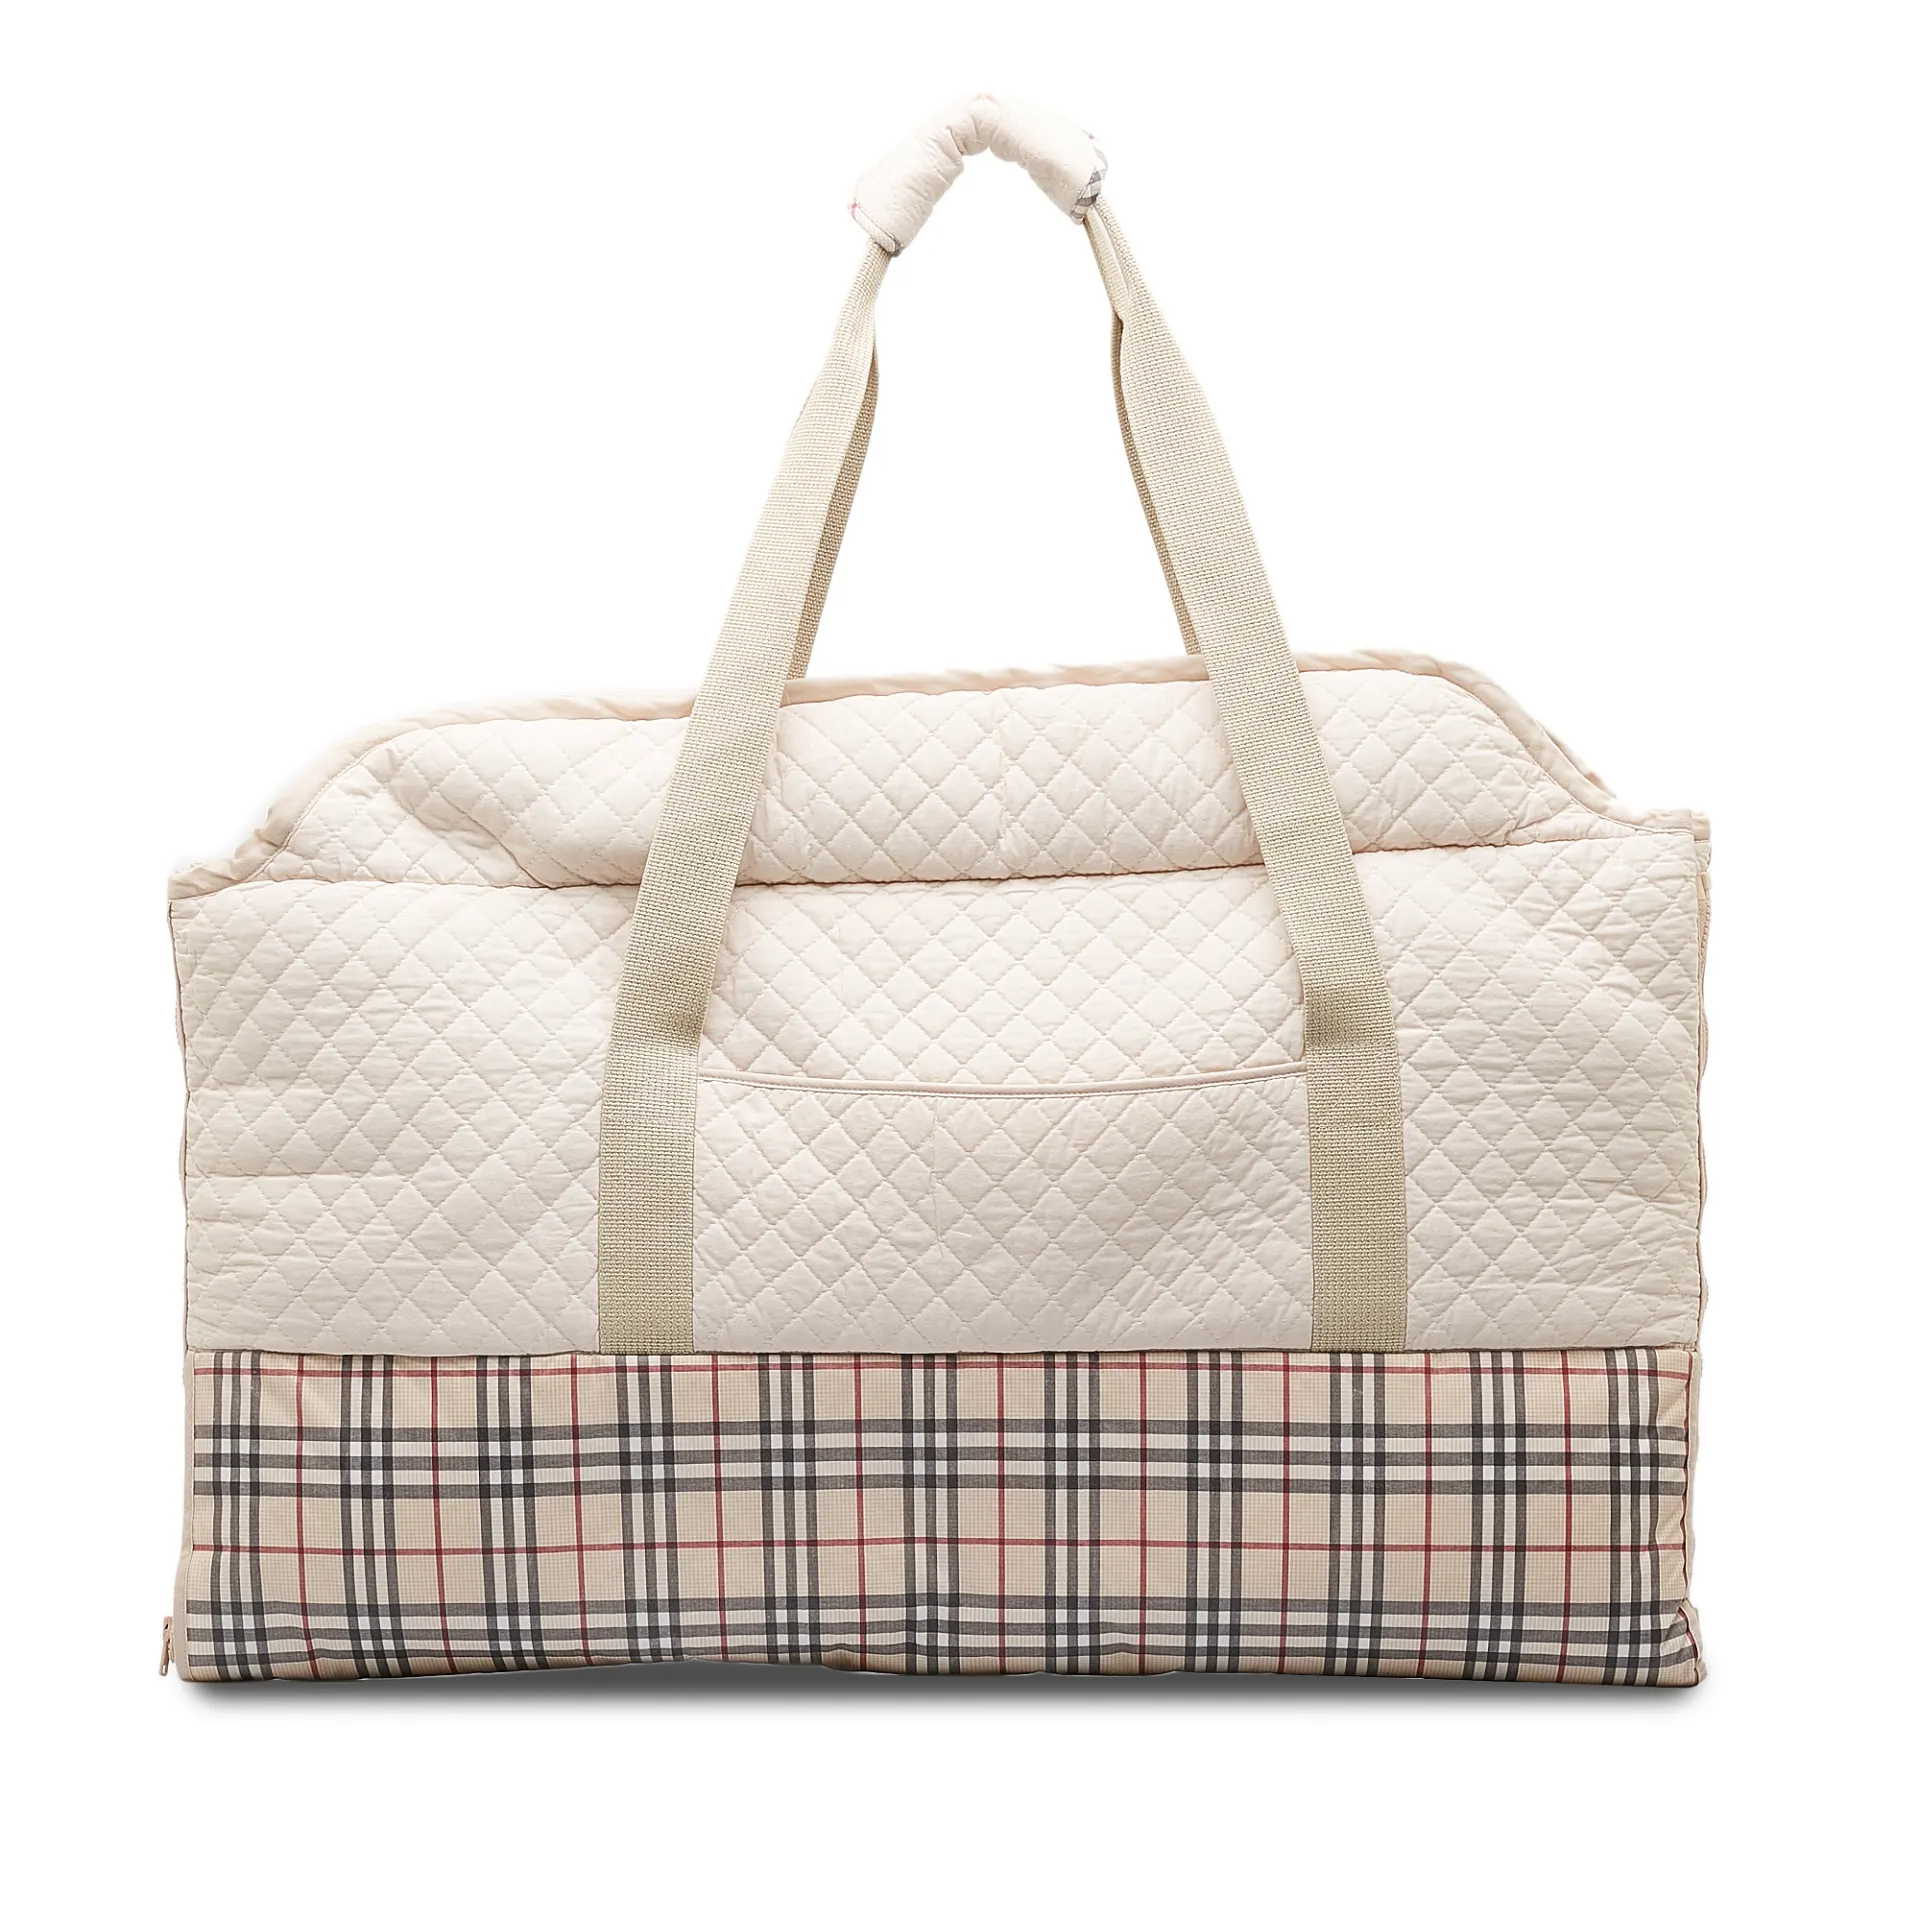 Burberry House Check Baby Changing Bag